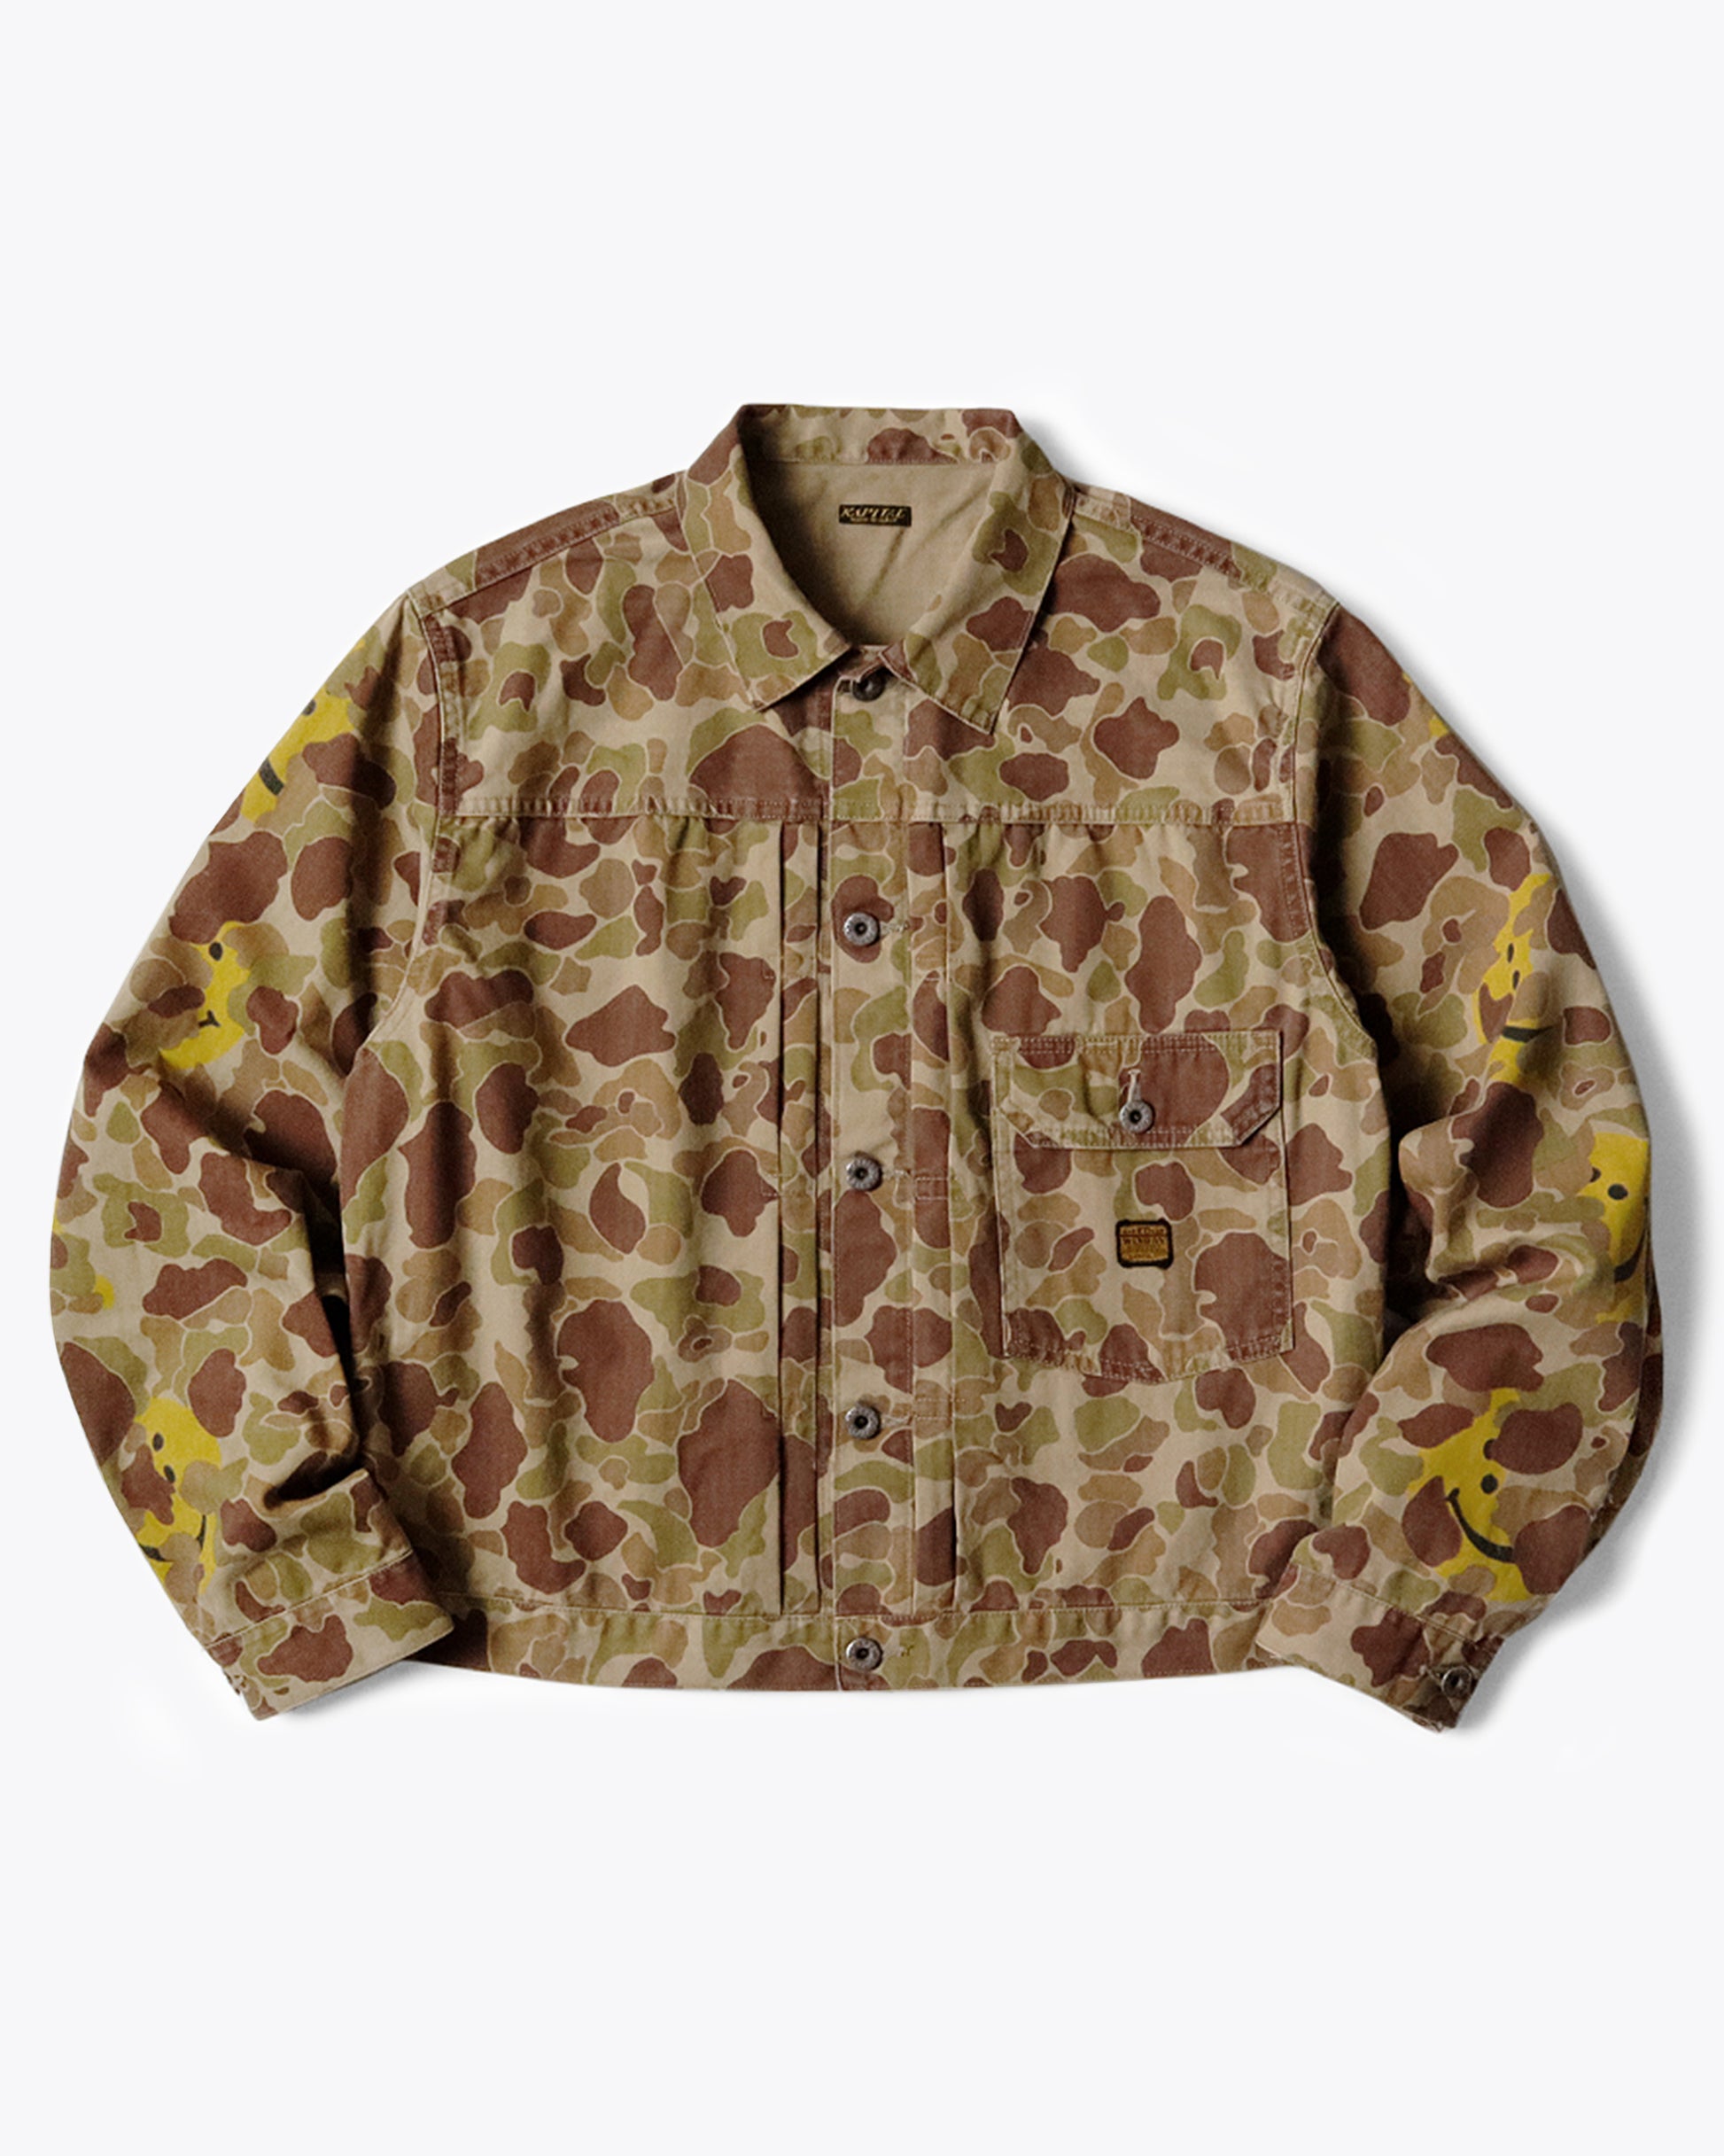 A military-like camouflage 1st jacket with smiley faces peeking out.